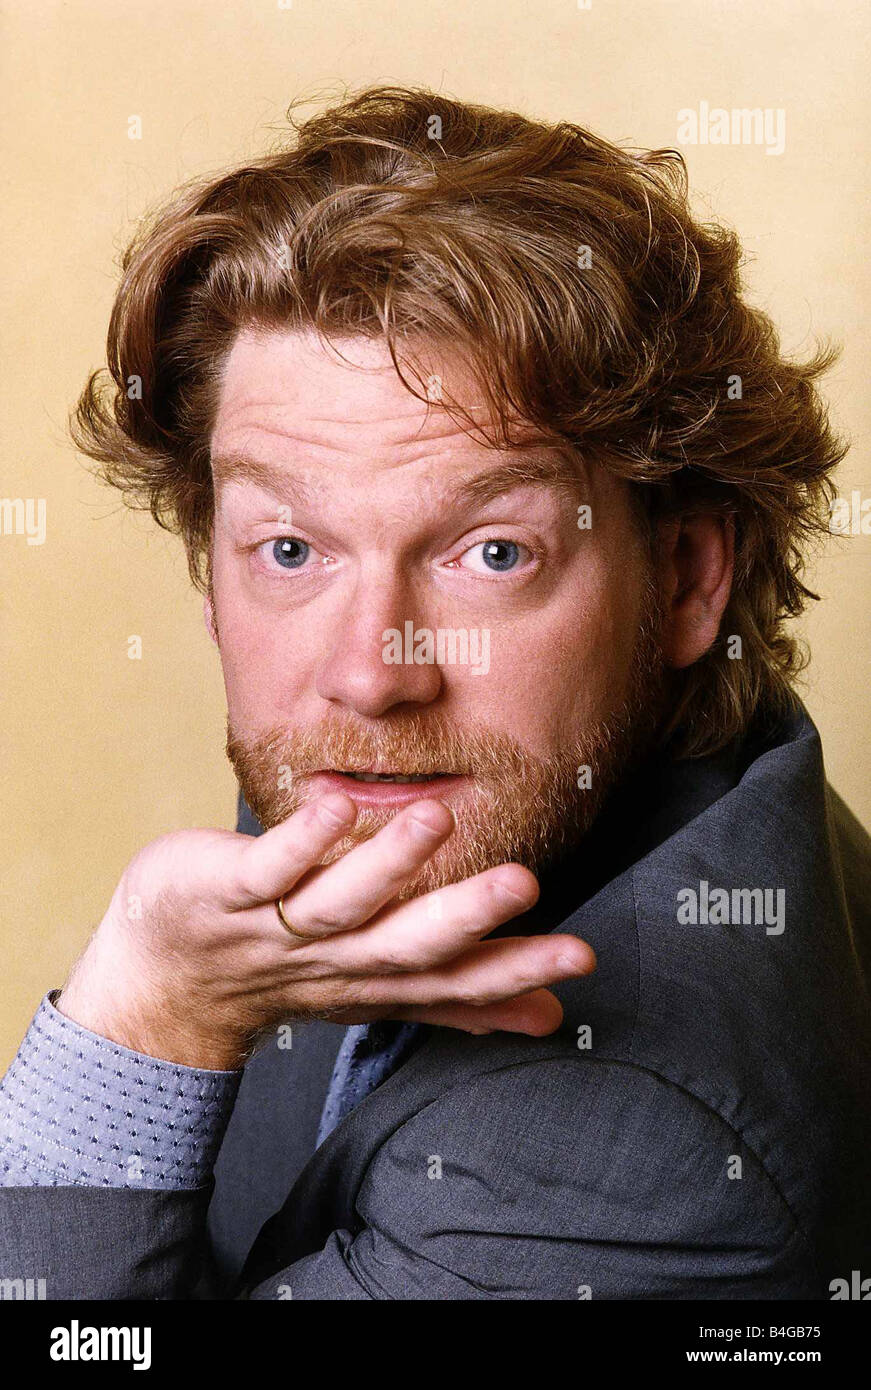 Kenneth branagh actor and director at the Durley House Hotel Sloane Street for Hilary Bonner Stock Photo